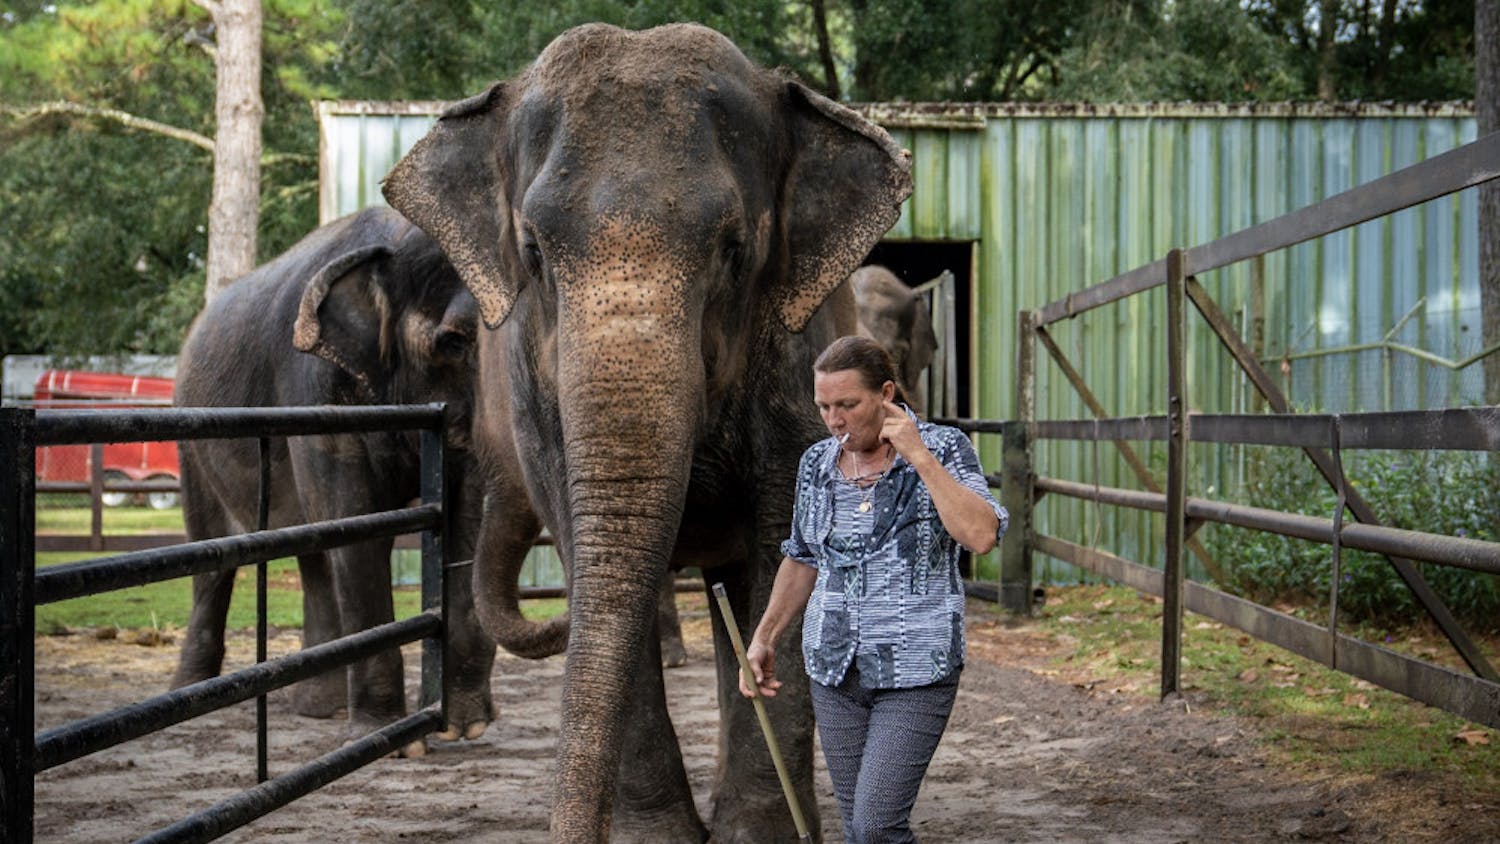 Patricia Zerbini, 54, the proprietor of Two Tails Ranch, guides several of her elephants to a paddock where she then answered questions about the animals. Elephant Appreciation Days were held at the ranch on Saturday and Sunday in order to raise awareness of elephant welfare efforts, as well as fundraising for their care. 